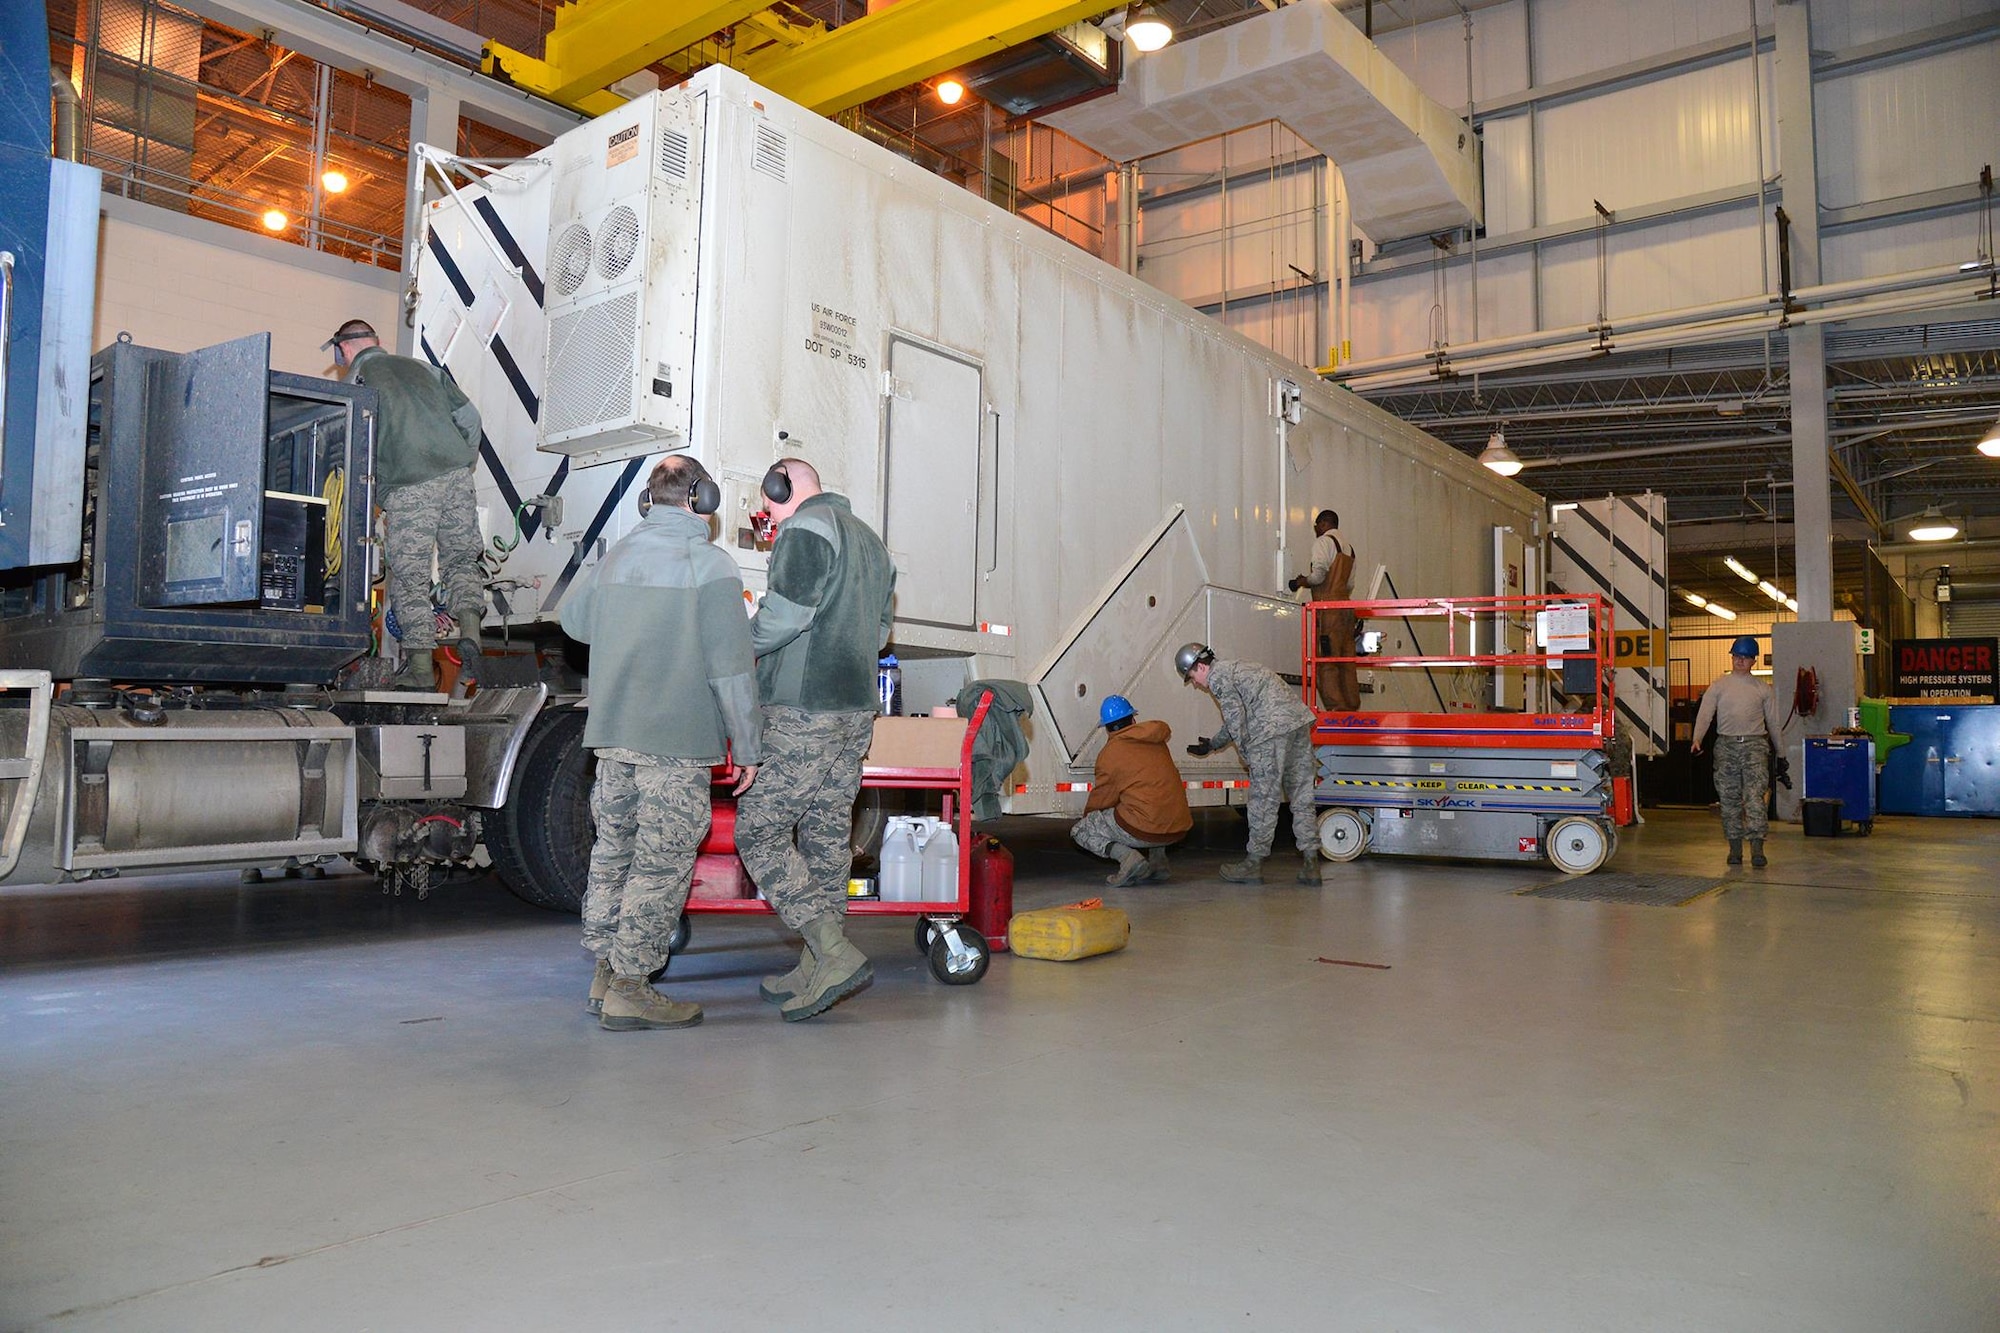 Airmen from the 341st Missile Maintenance Squadron perform maintenance on a payload transporter Feb. 8, 2016, at Malmstrom Air Force Base, Mont. The 341st MMXS is one of many teams that contributed toward the 341st Maintenance Group 2016 Air Force Maintenance Effectiveness Award. (U.S. Air Force photo/Airman First Class Daniel Brosam)